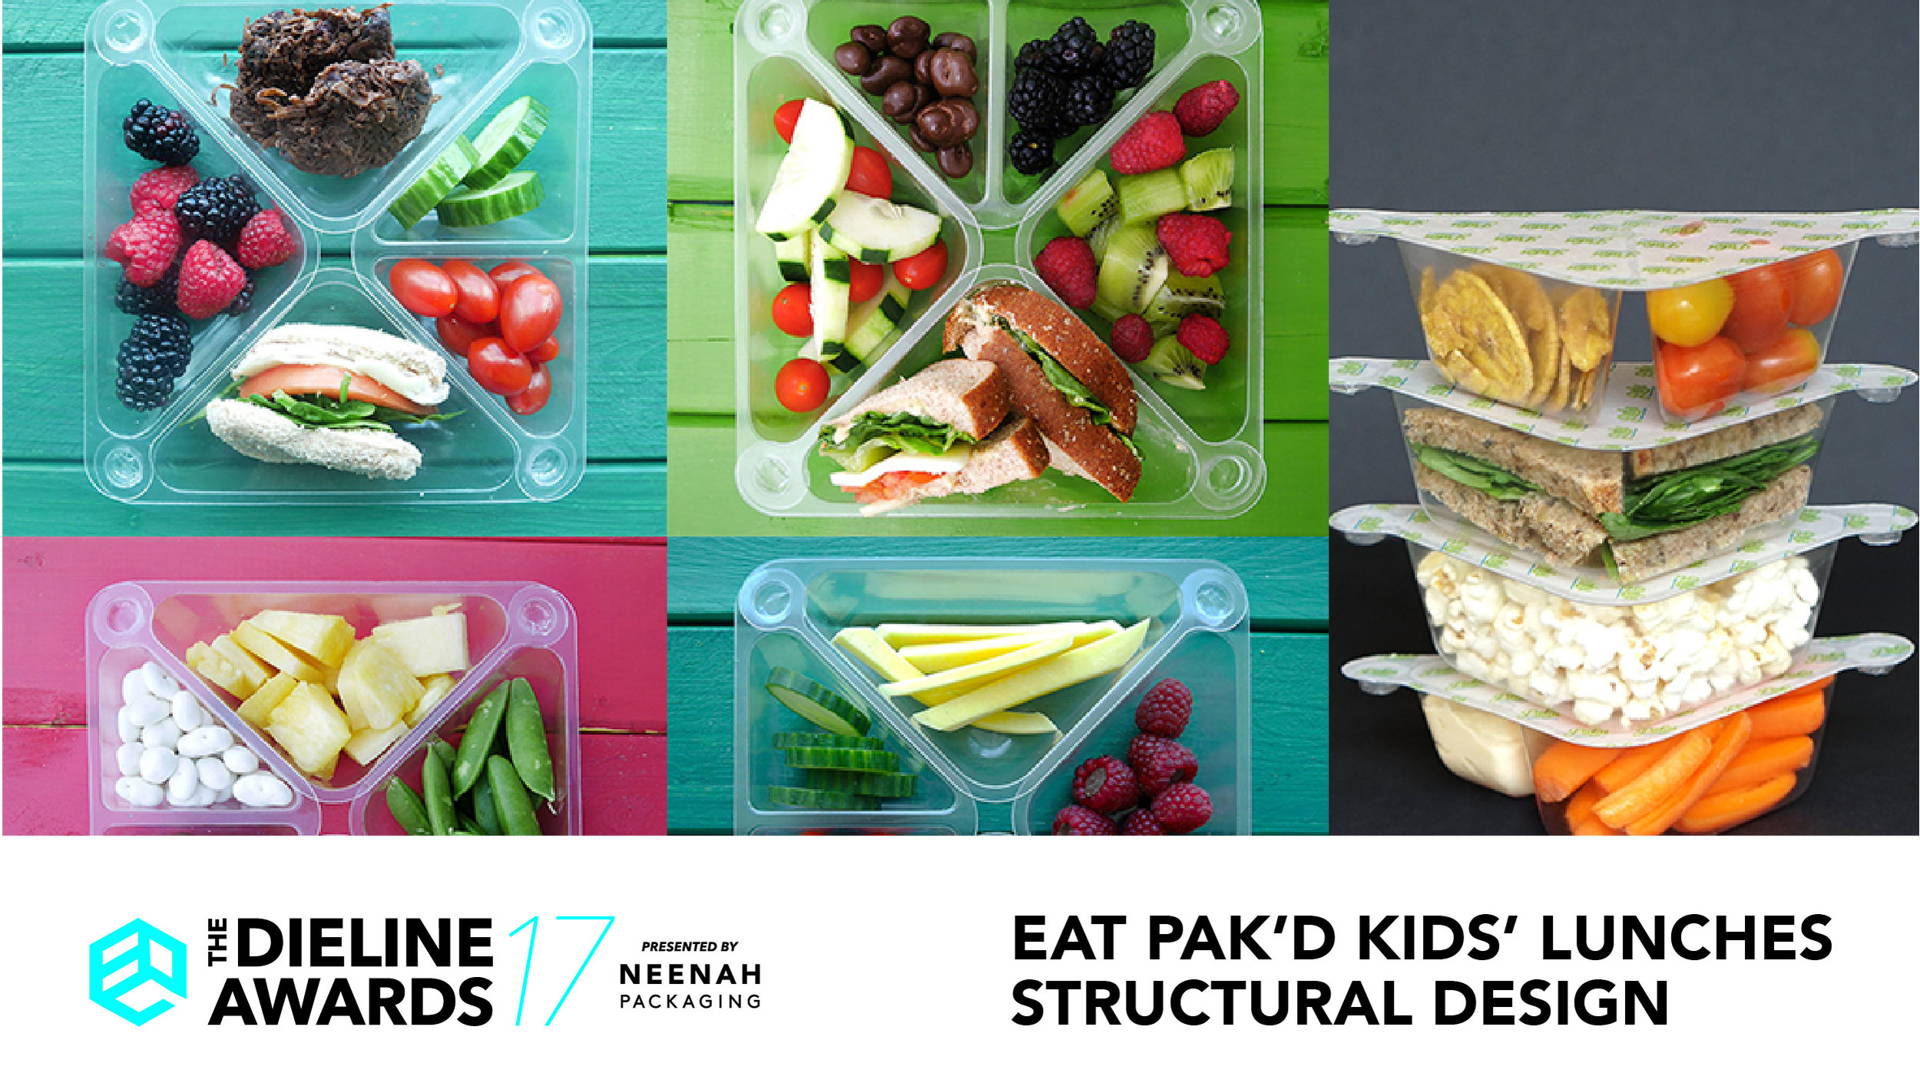 Featured image for The Dieline Awards 2017 Outstanding Achievements: EAT PAK’D KIDS’ LUNCHES STRUCTURAL DESIGN